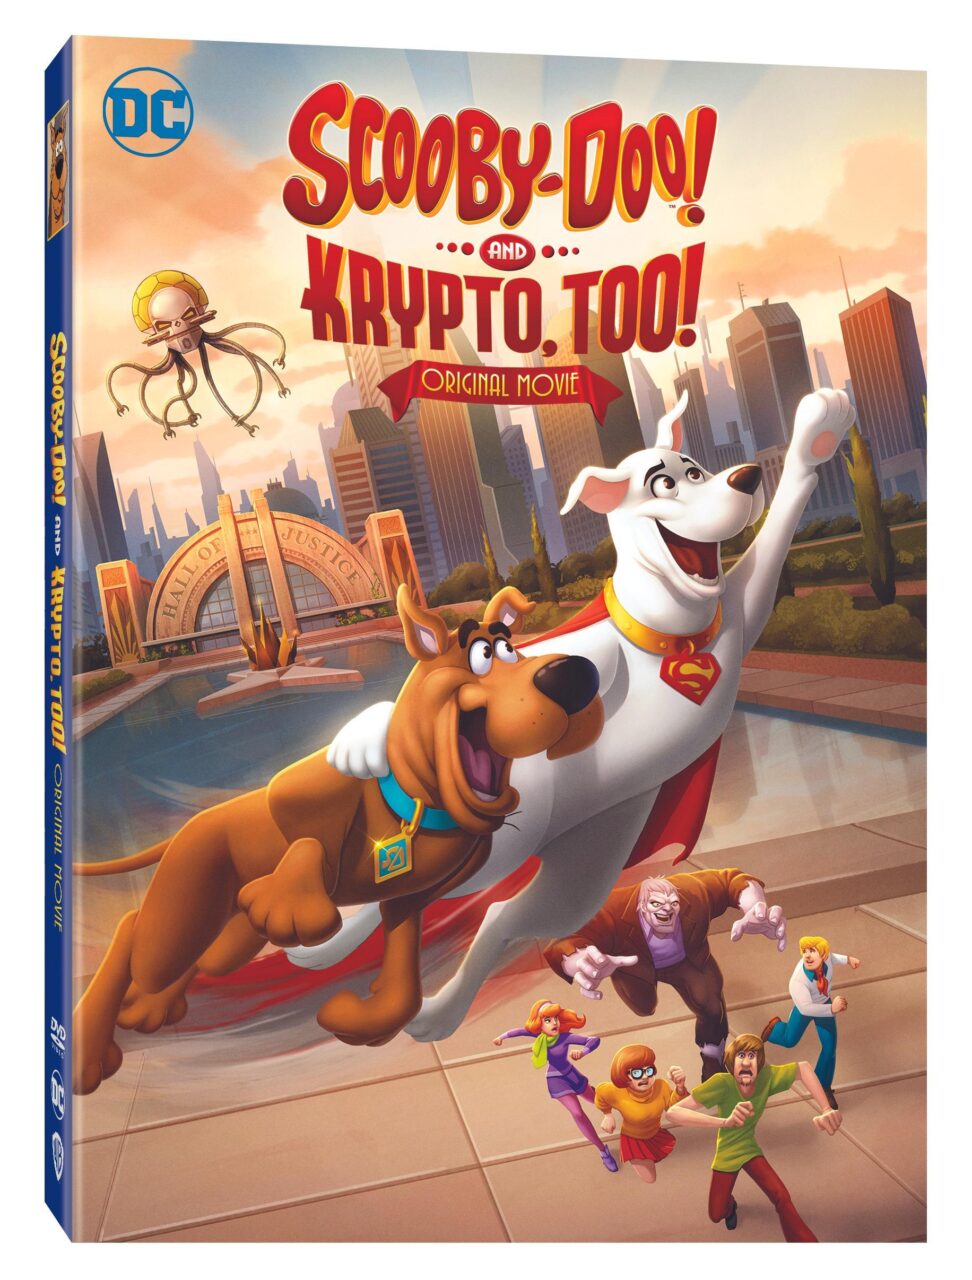 Scooby-Doo and Krypto, Too! DVD cover (Warner Bros. Discovery Home Entertainment)